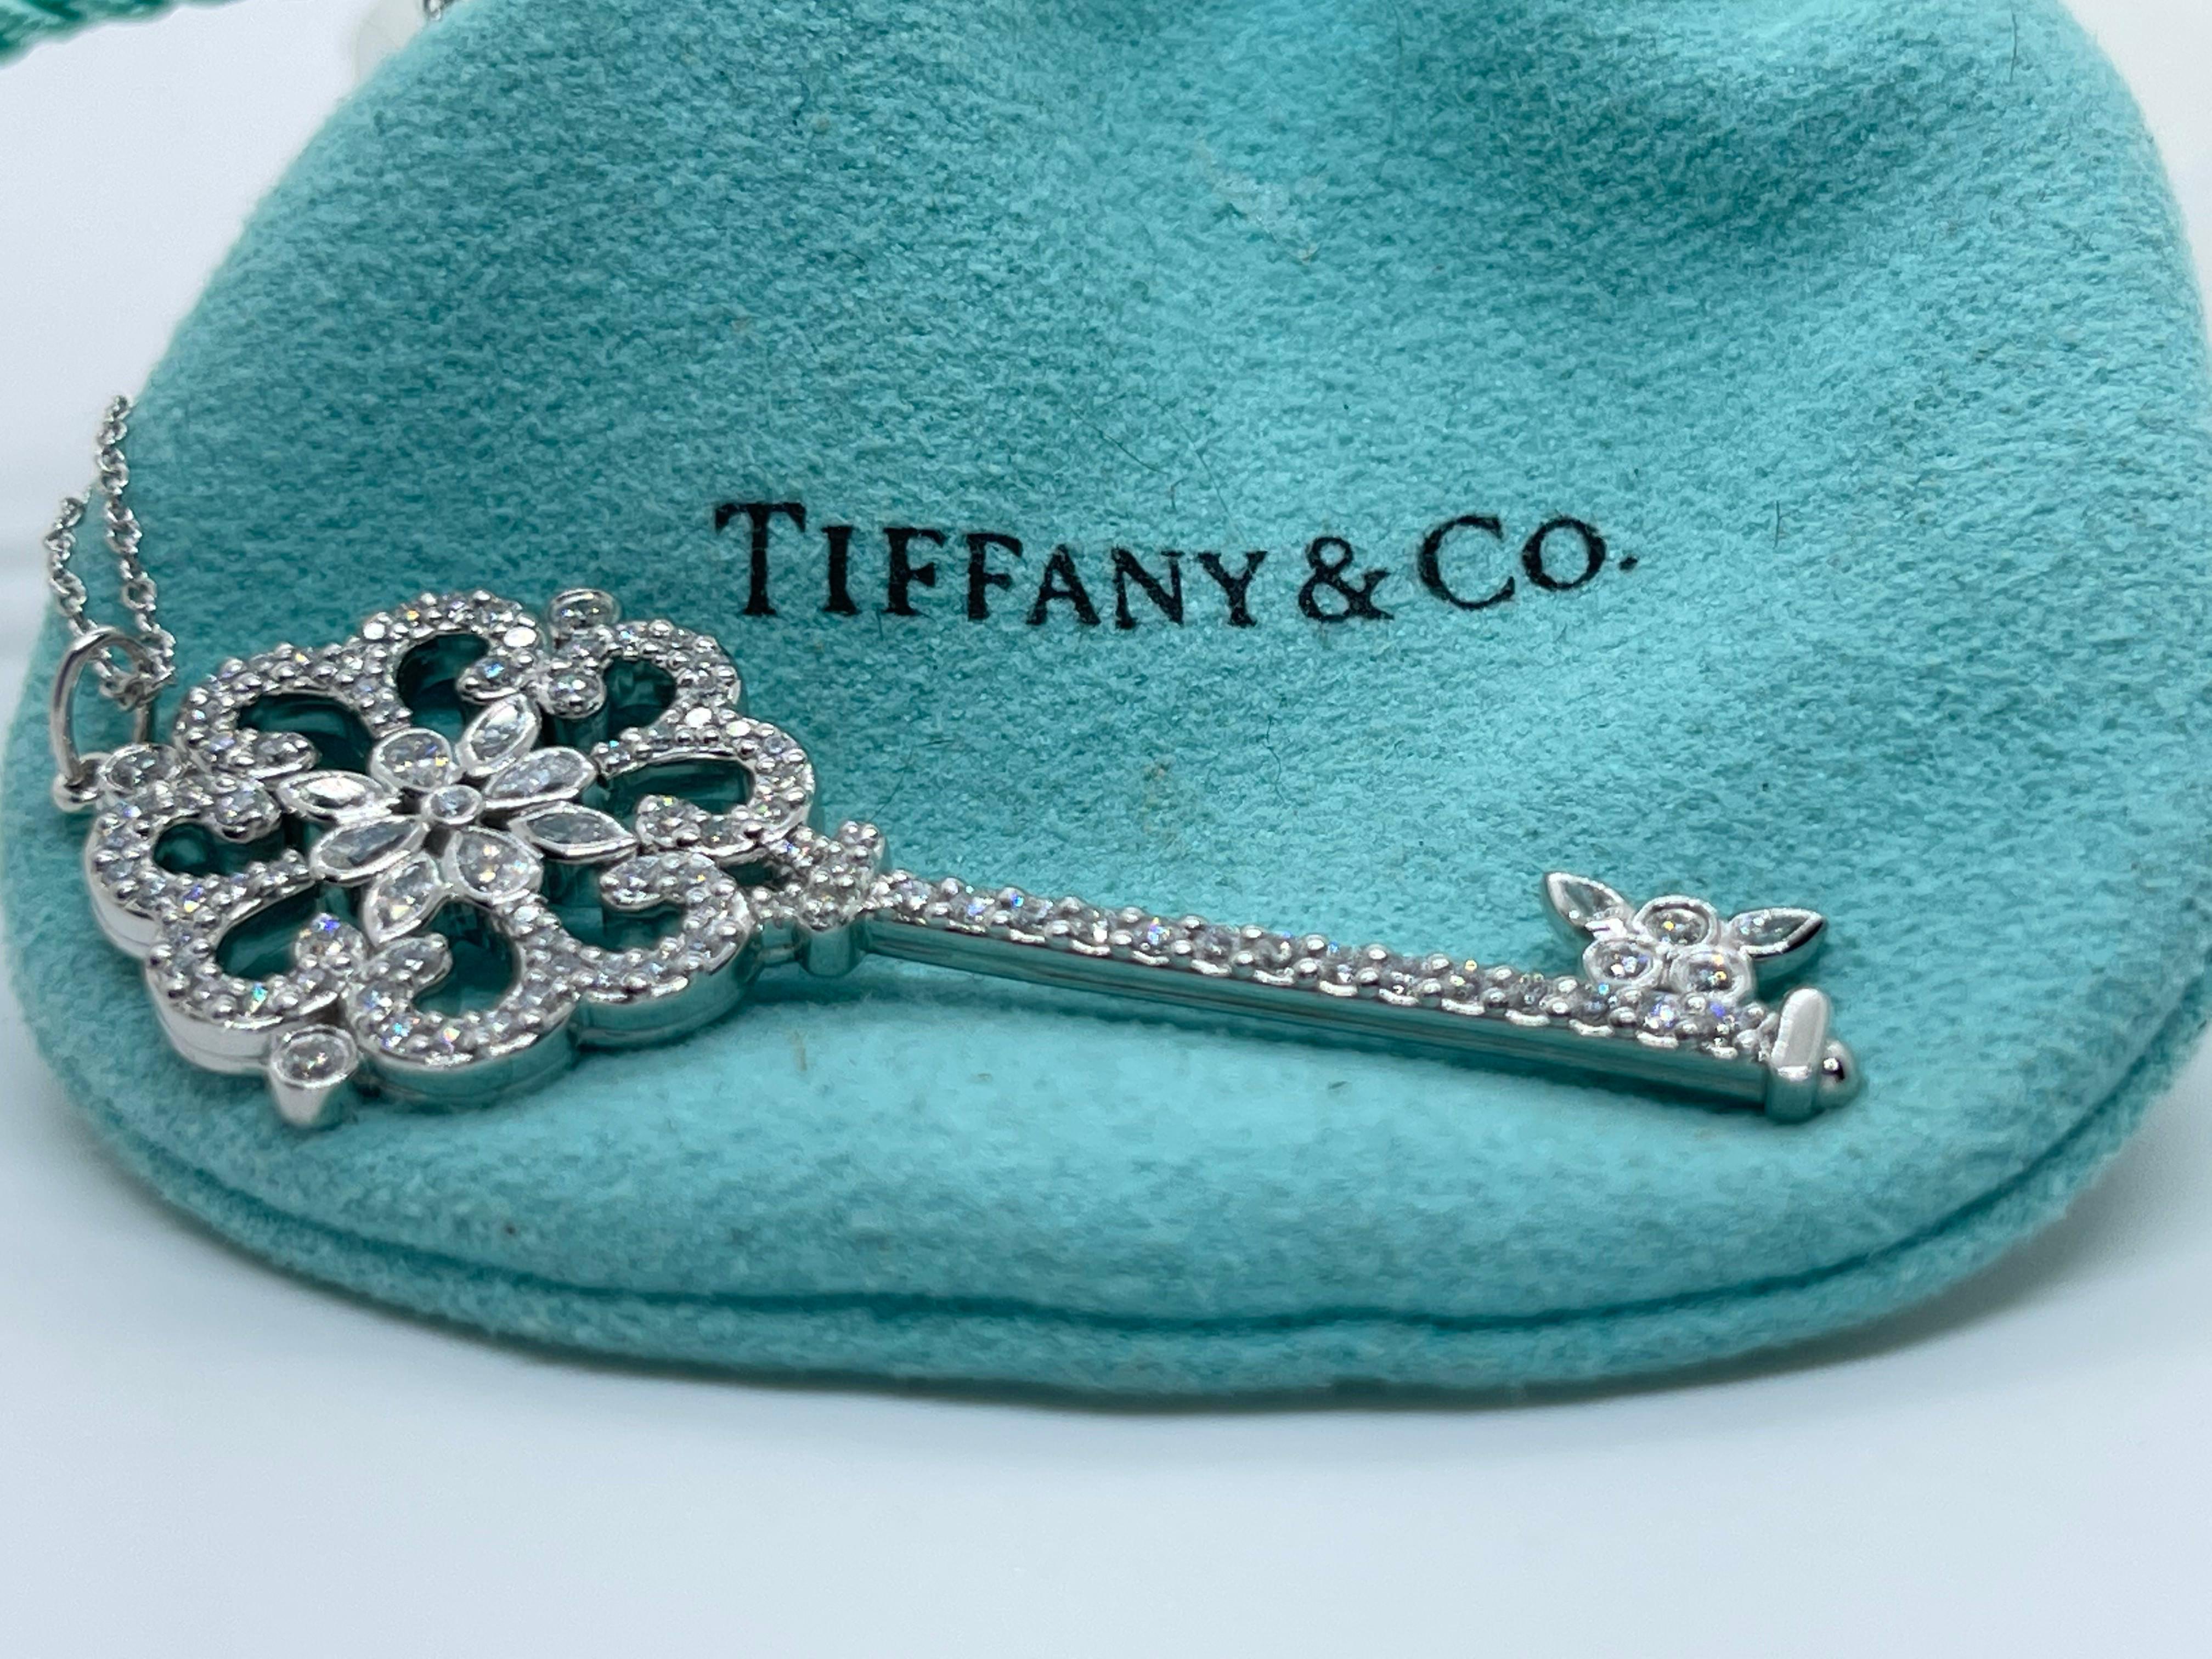 Tiffany & Co diamond necklace in platinum. The famous modele 